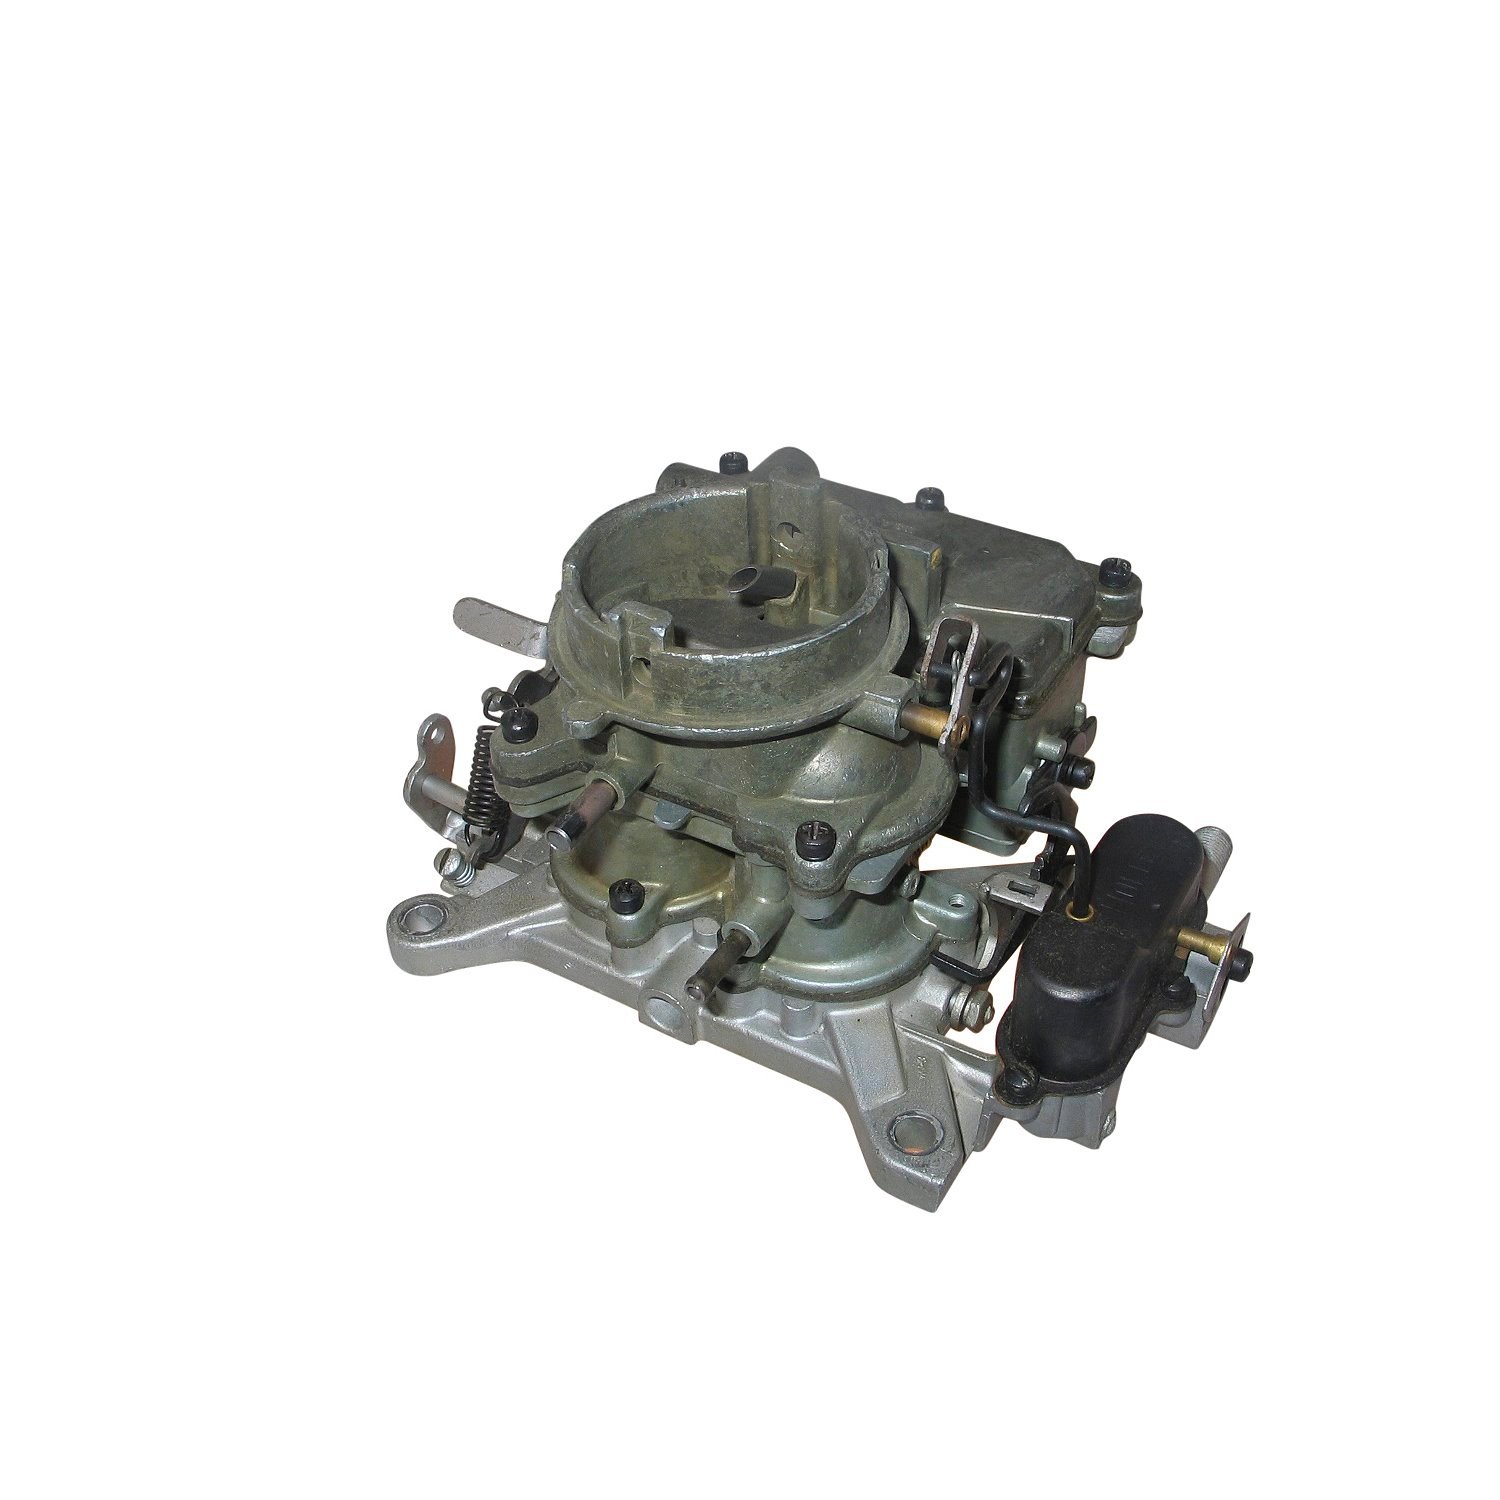 16-1626 Holley Remanufactured Carburetor, 2209-Style